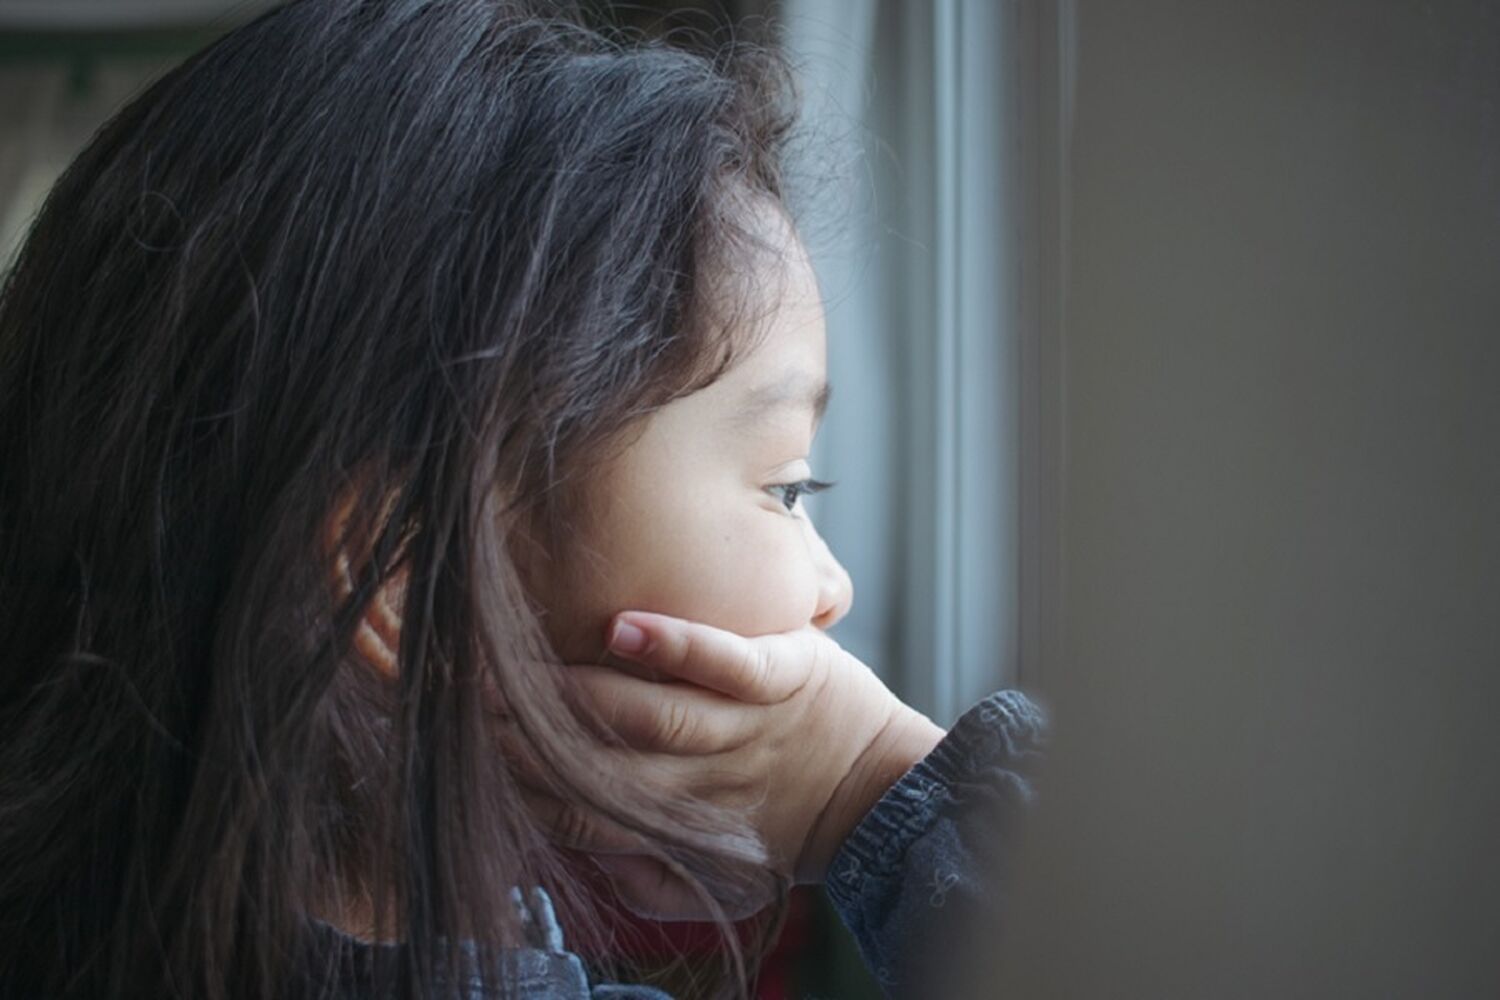 A Toddler Girl Looking Out The Window With Her Hand On Her Face